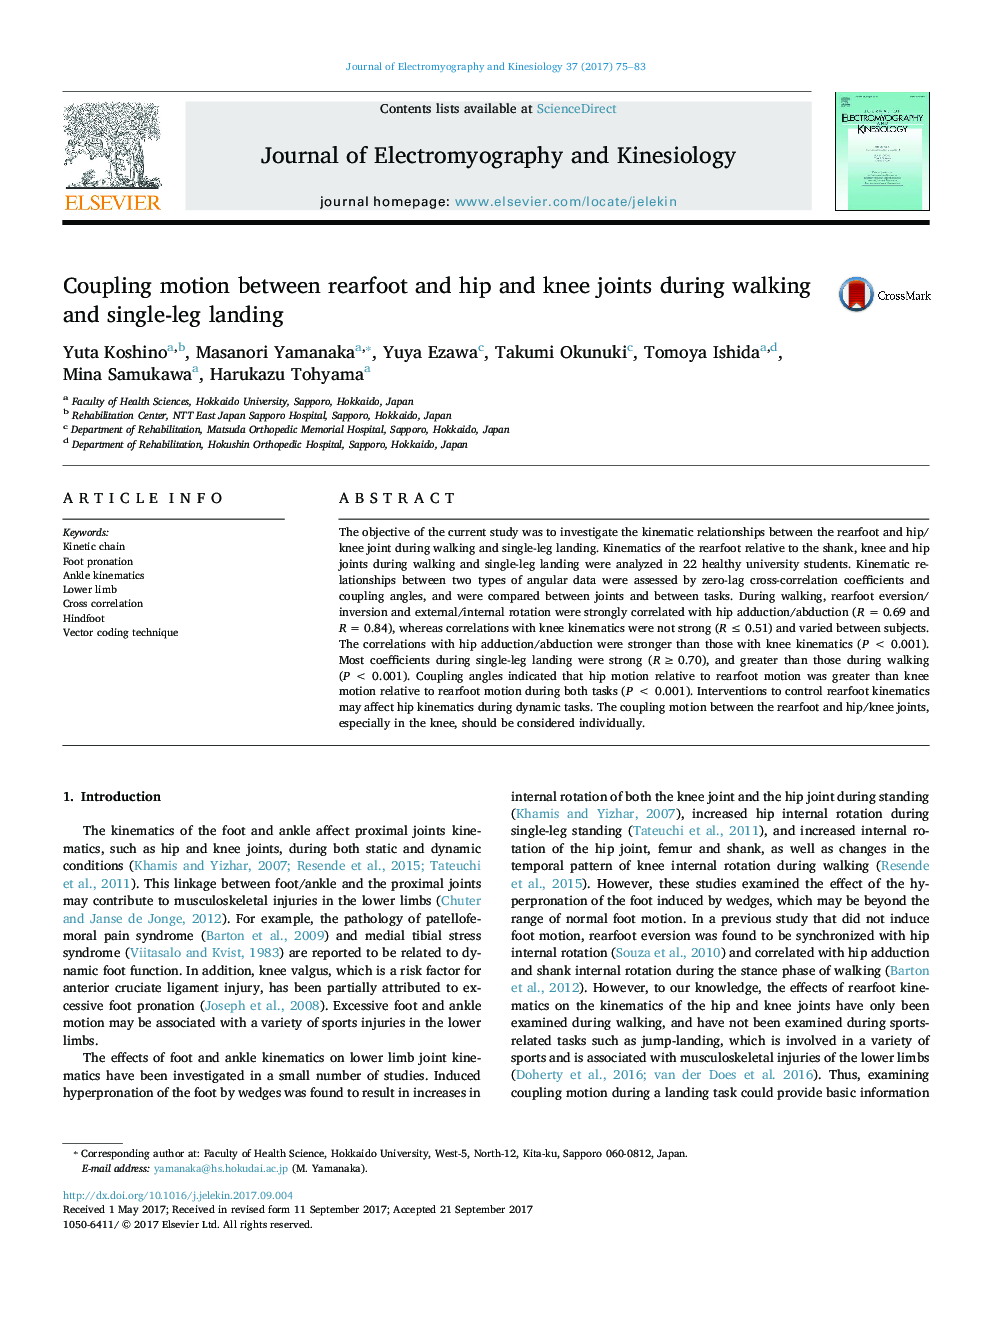 Coupling motion between rearfoot and hip and knee joints during walking and single-leg landing